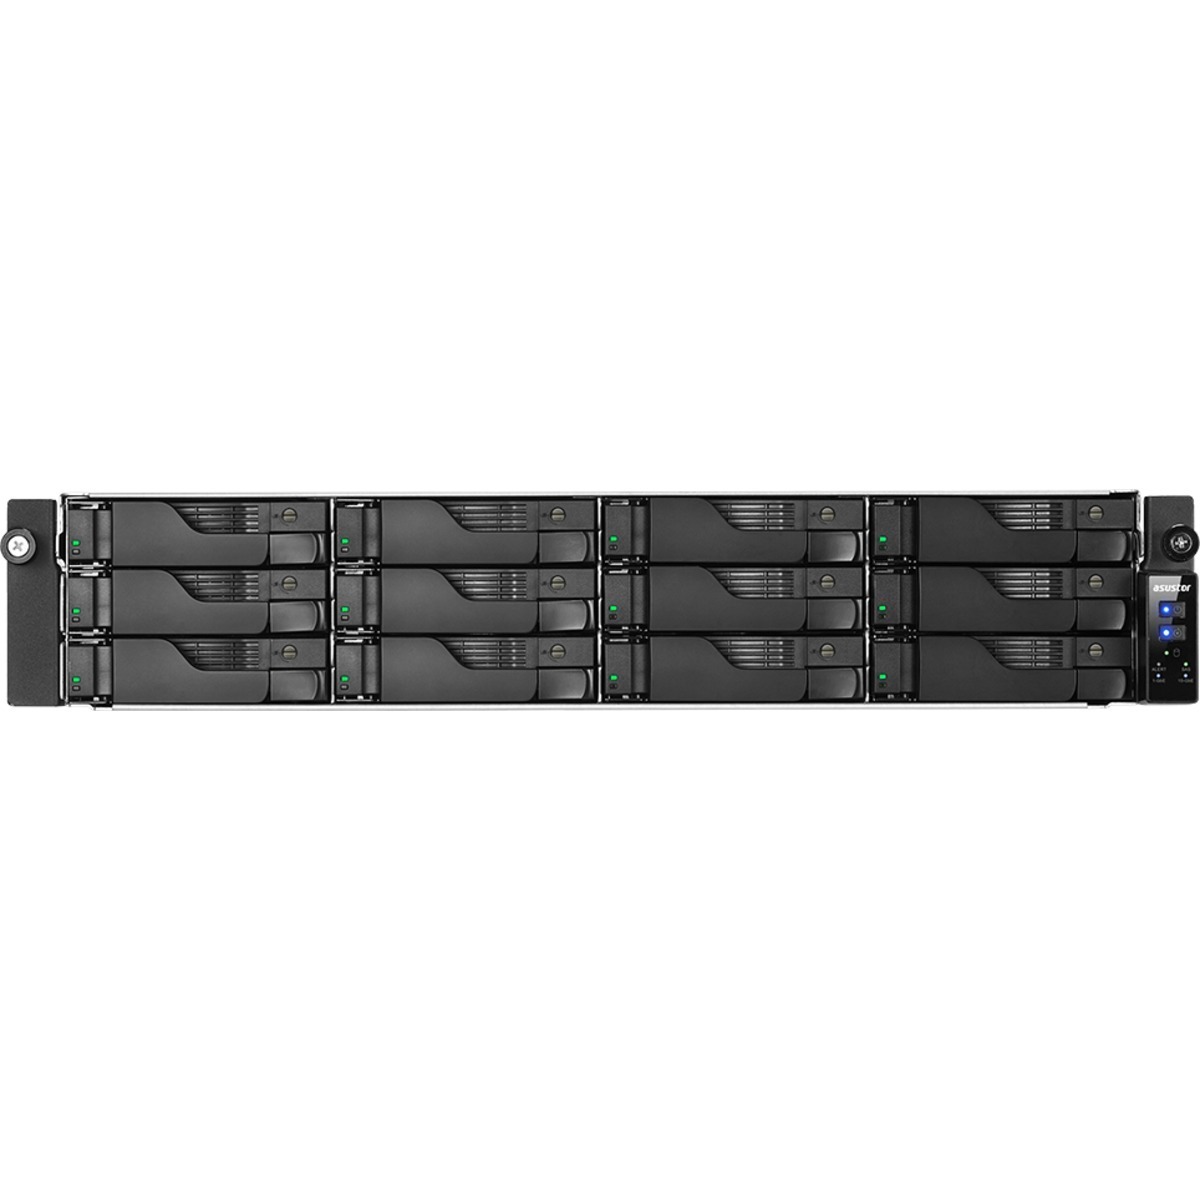 buy ASUSTOR AS7112RDX Lockerstor 12R Pro RackMount NAS - Network Attached Storage Device Burn-In Tested Configurations - nas headquarters buy network attached storage server device das new raid-5 free shipping usa christmas new year holiday sale AS7112RDX Lockerstor 12R Pro